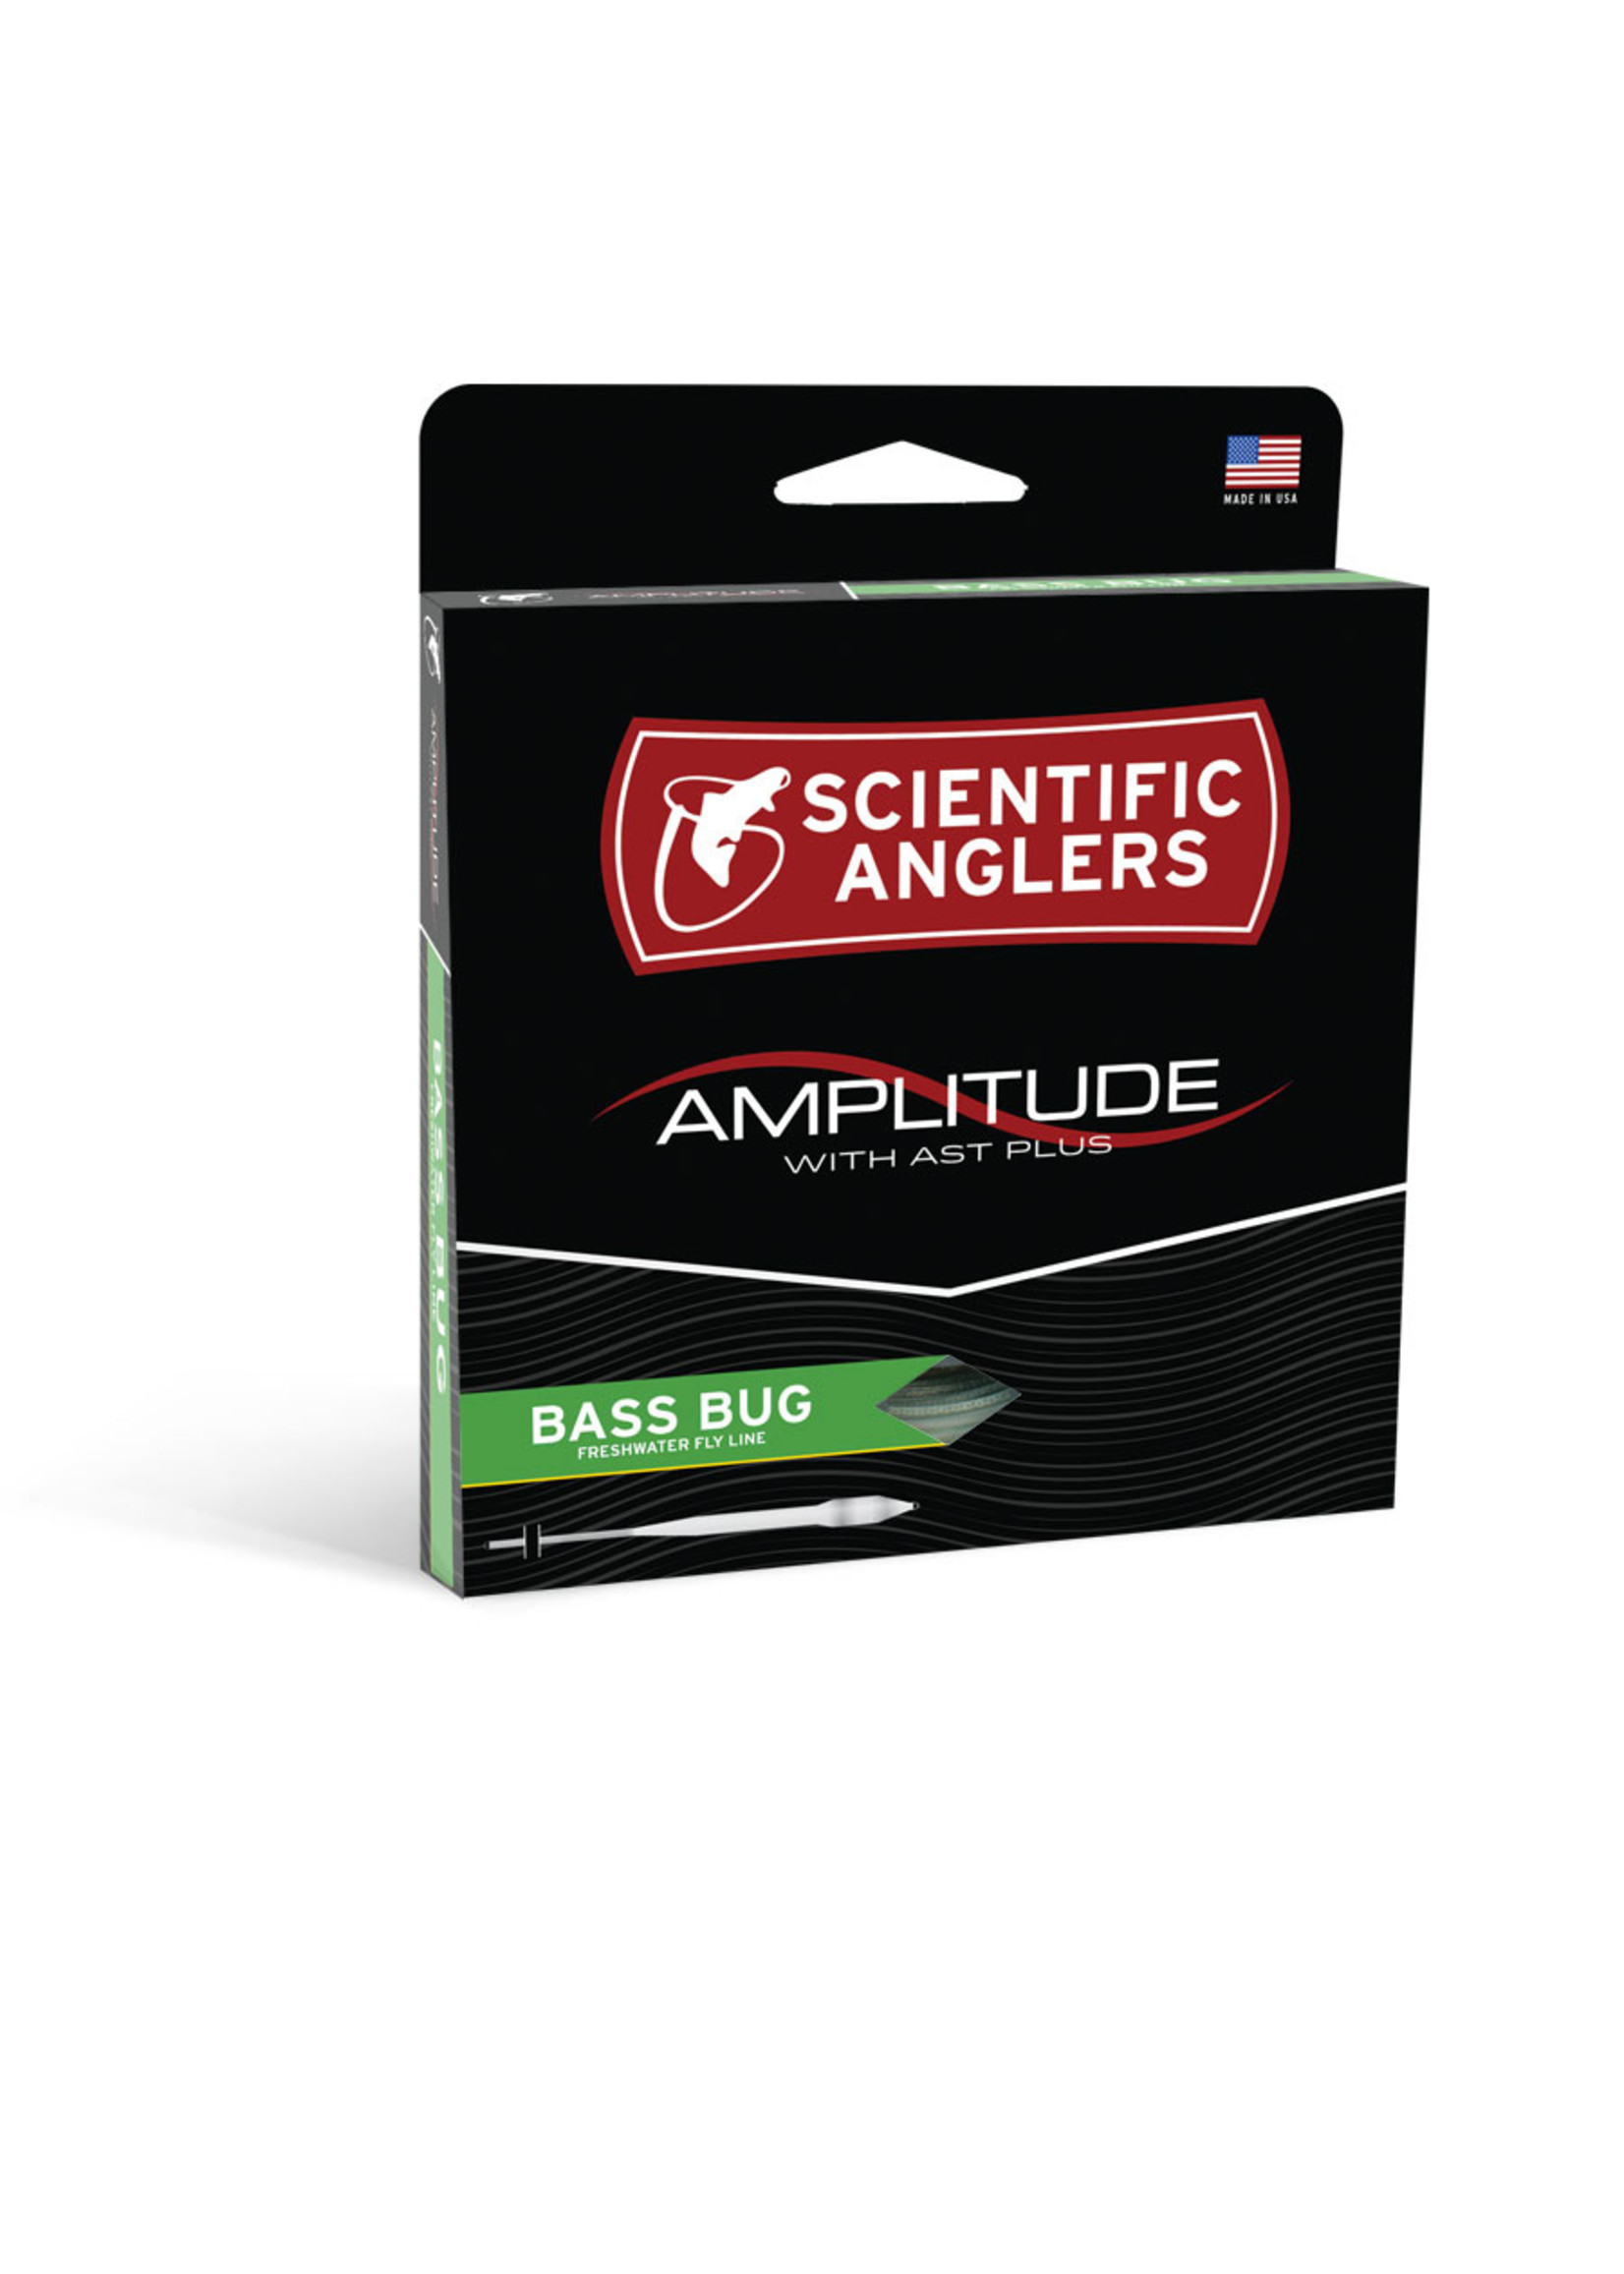 Scientific Anglers Scientific Anglers Amplitude Bass Bug Fly Line